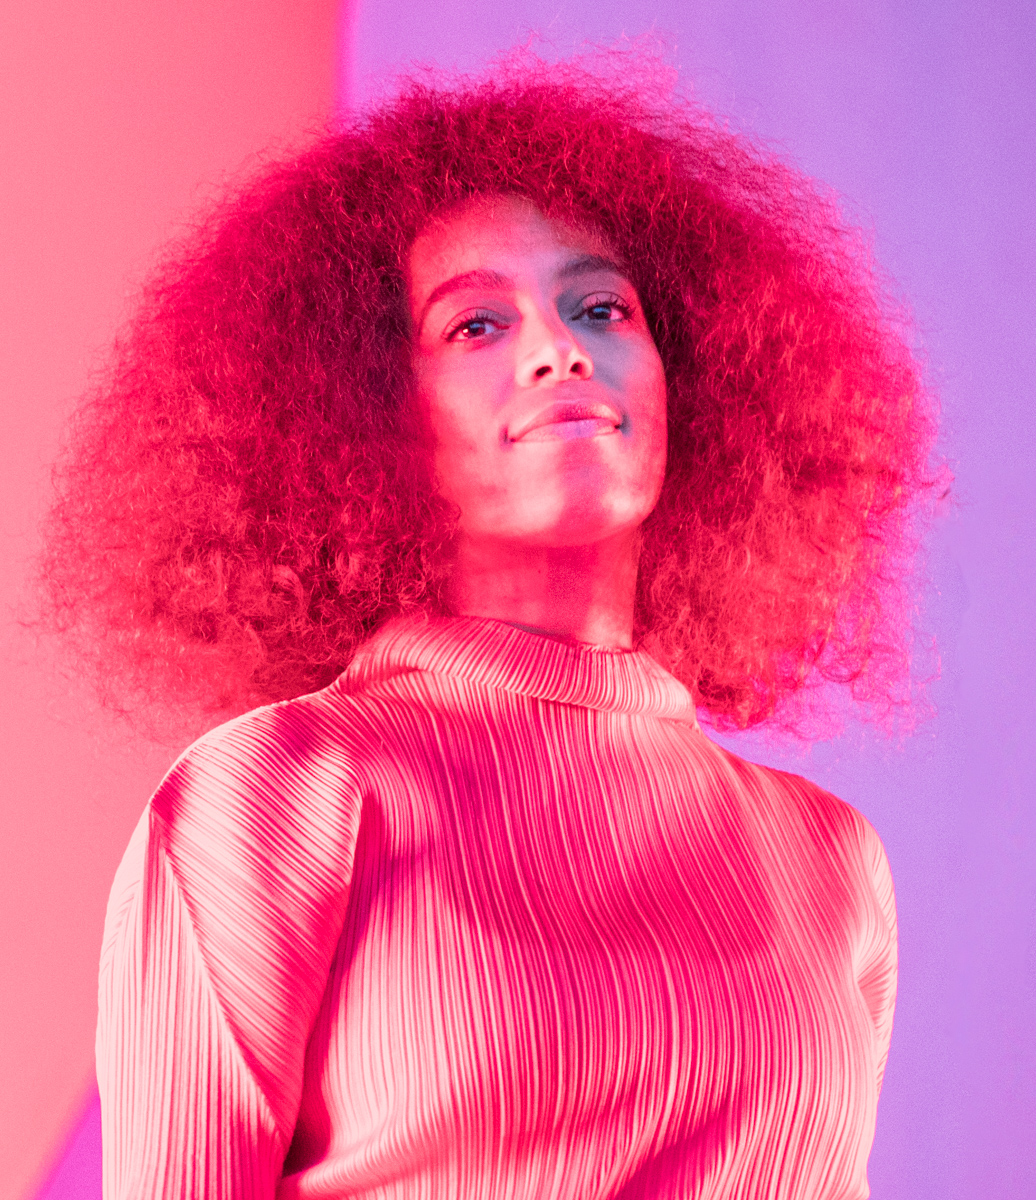 Solange Knowles - Simple English Wikipedia, the free encyclopedia